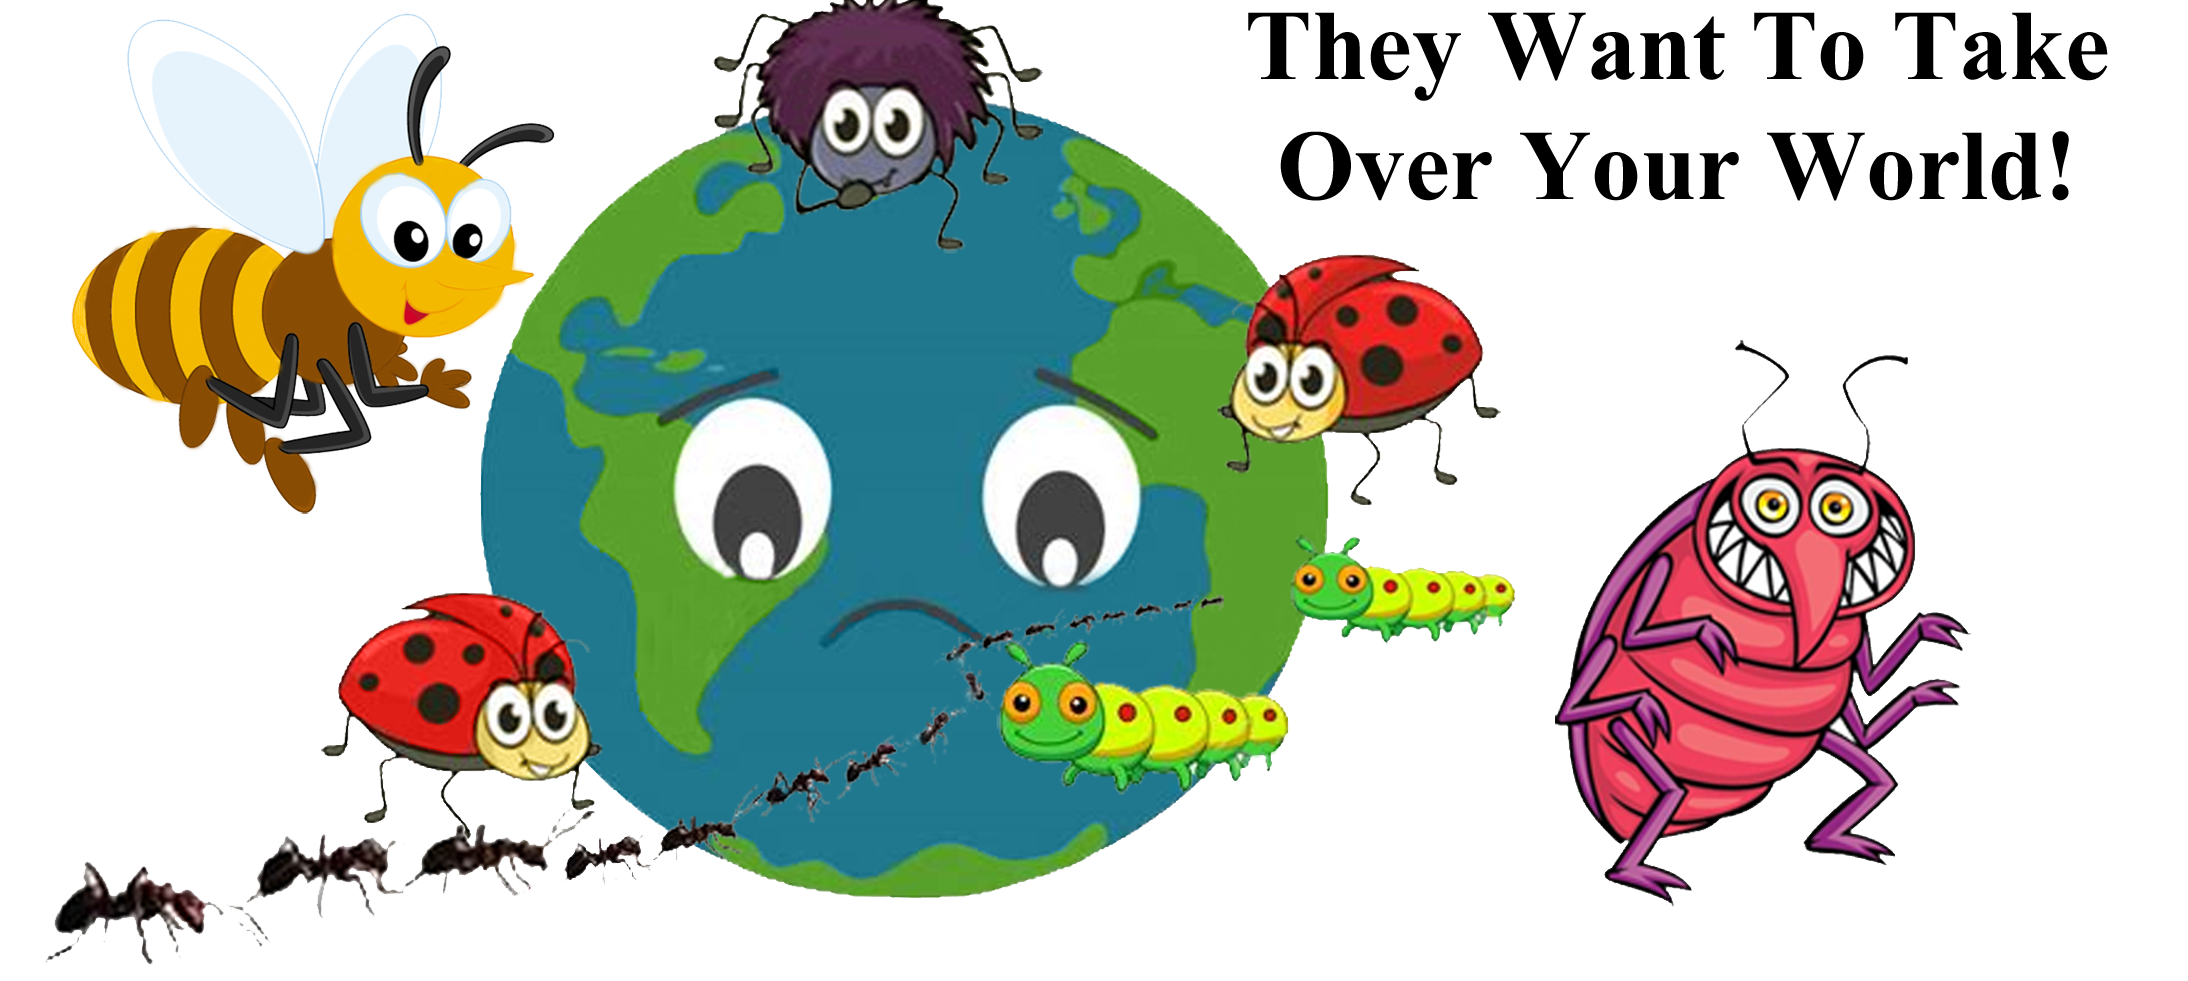 A cartoon of bugs and a planet earth